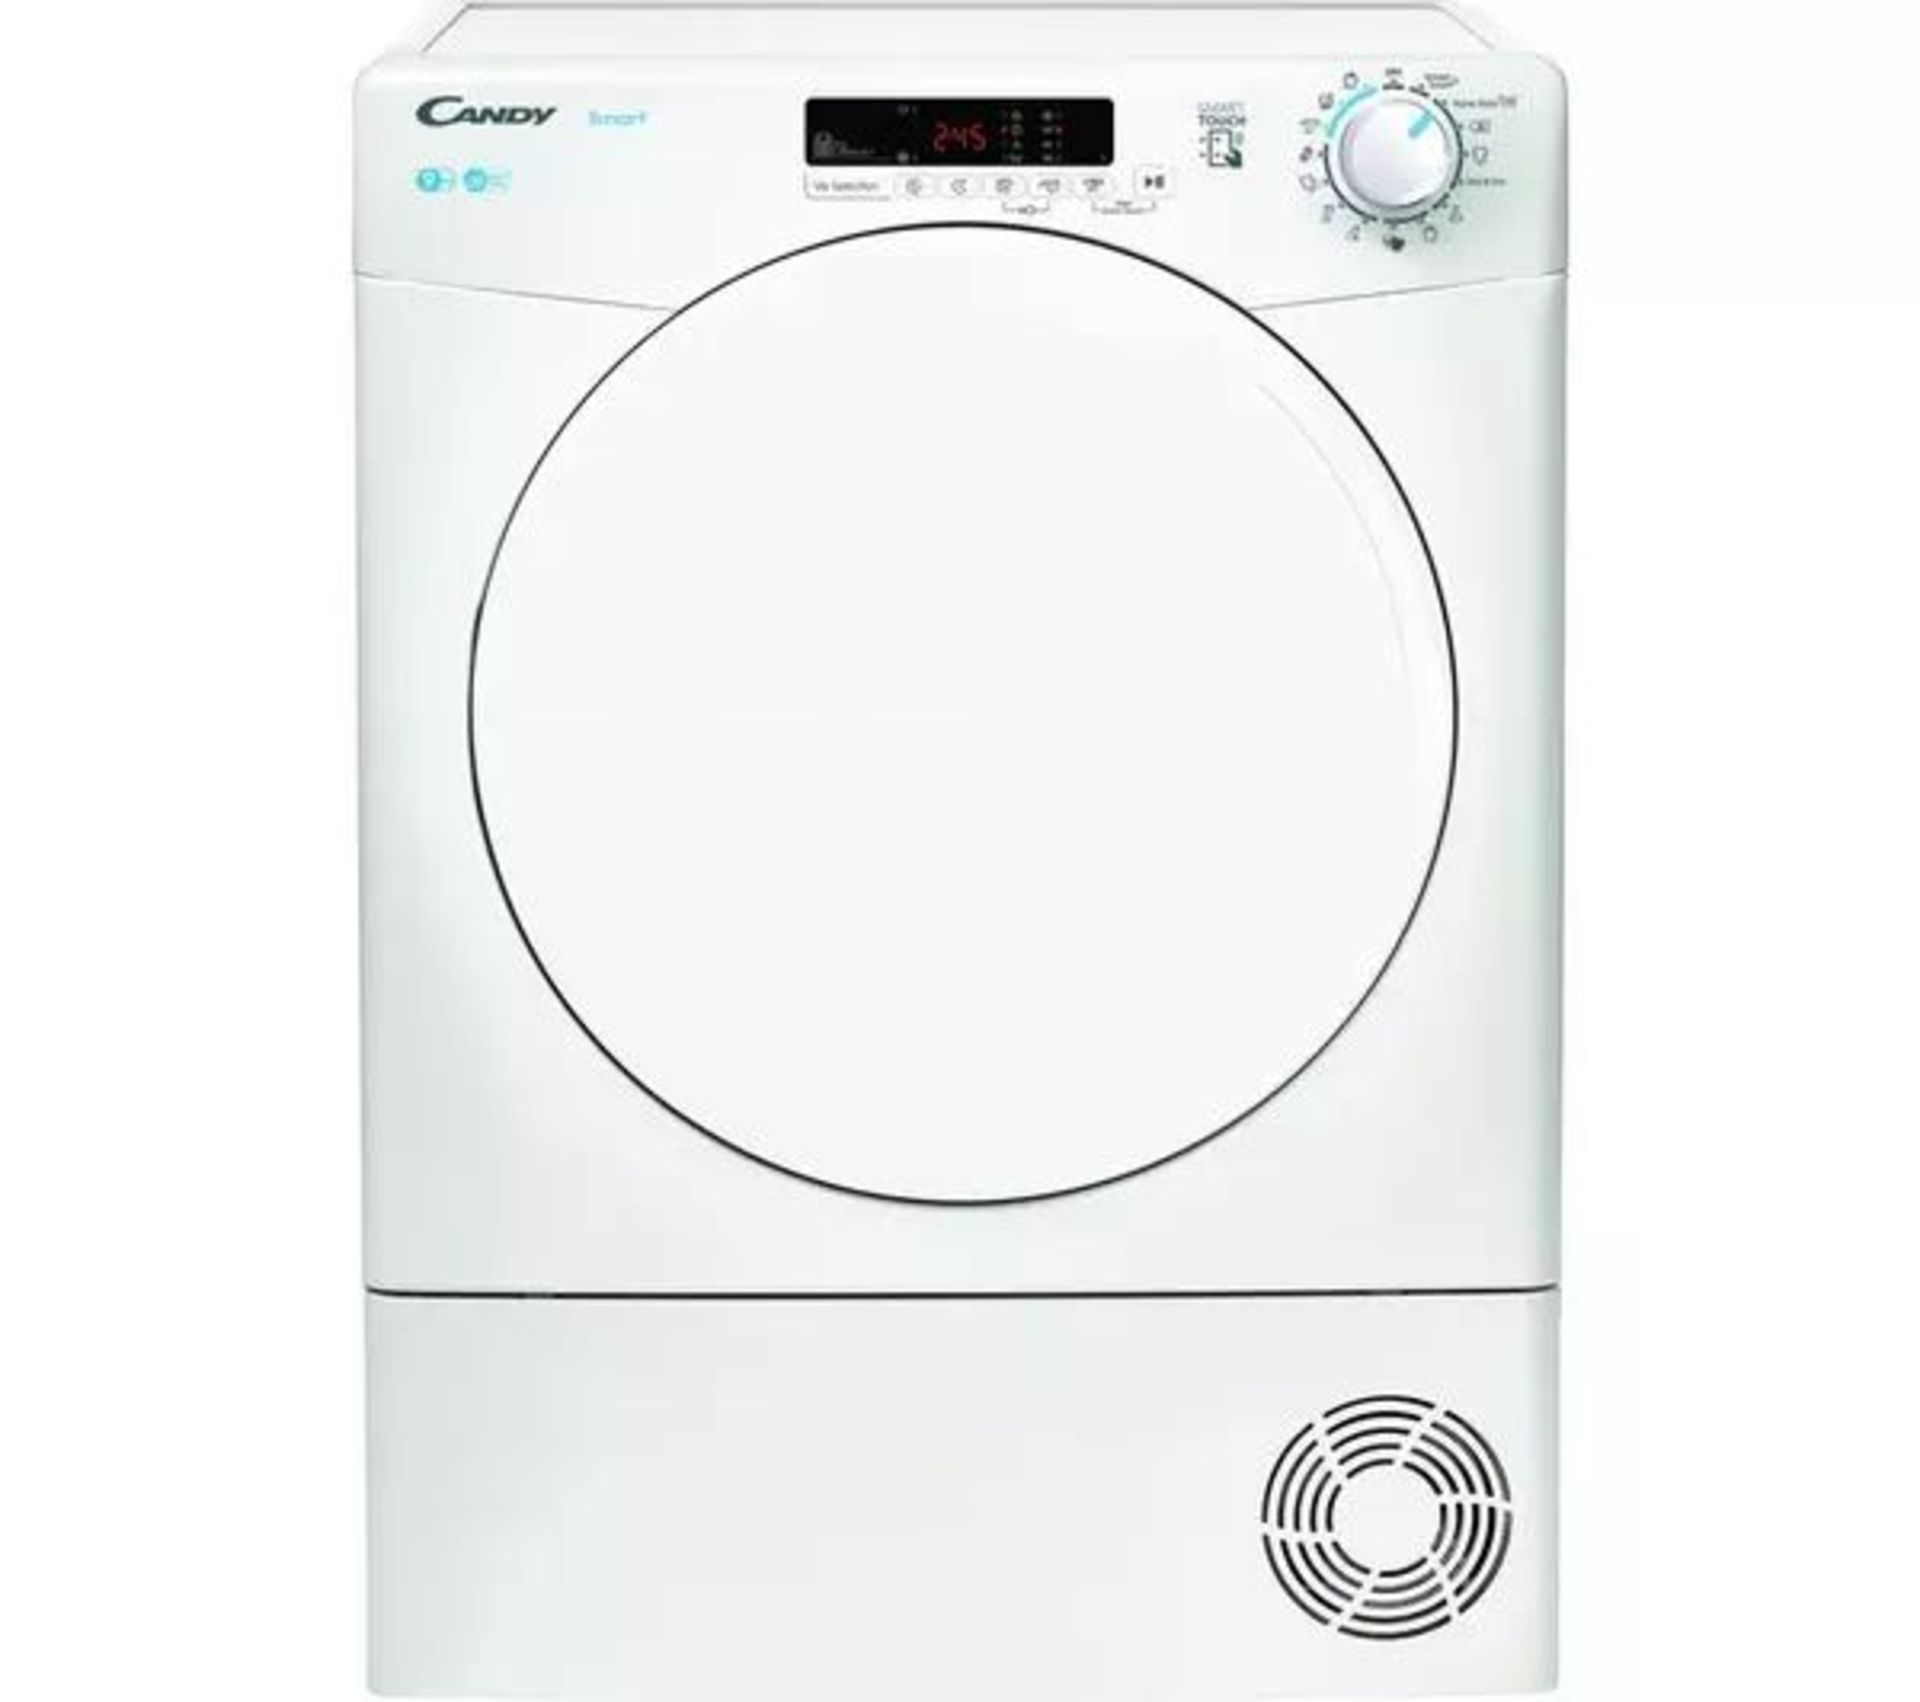 CANDY CSE C9DF80 NFC 9kg Condenser Tumble Dryer - White. - S2. RRP £399.00. This Candy tumble